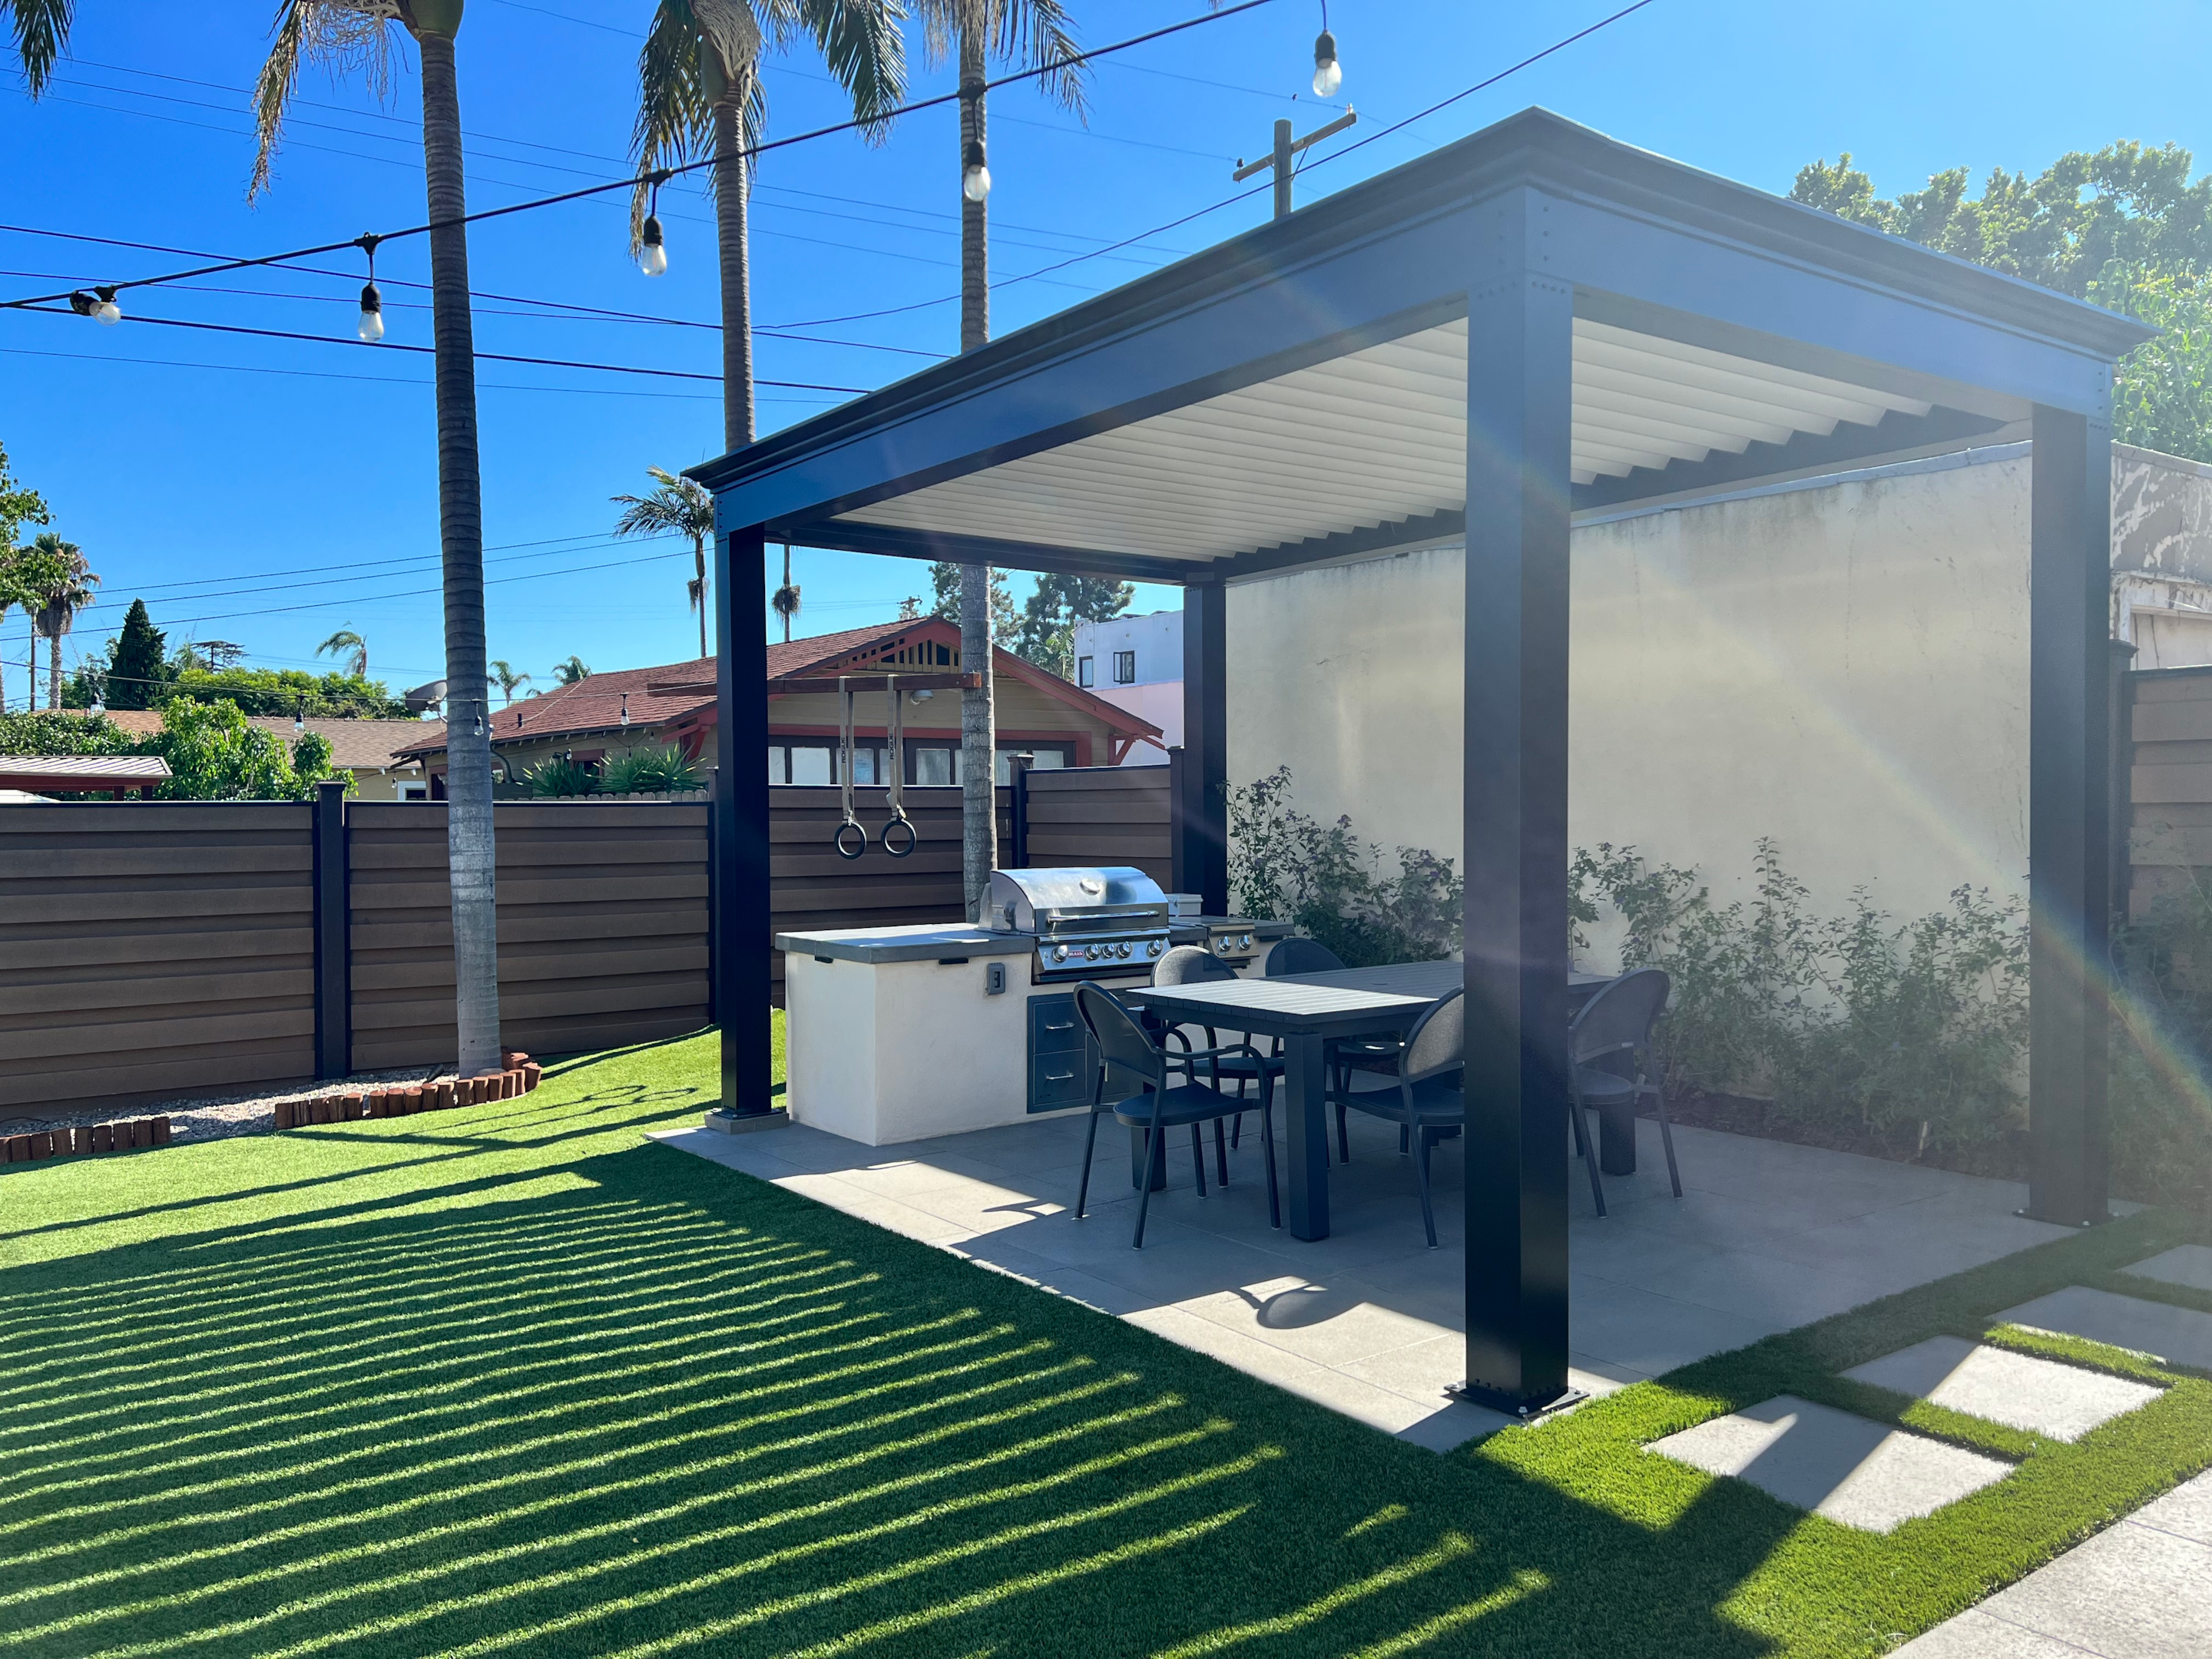 Outdoor kitchens with outdoor furniture and modern pergola granting shade cover from new pergola